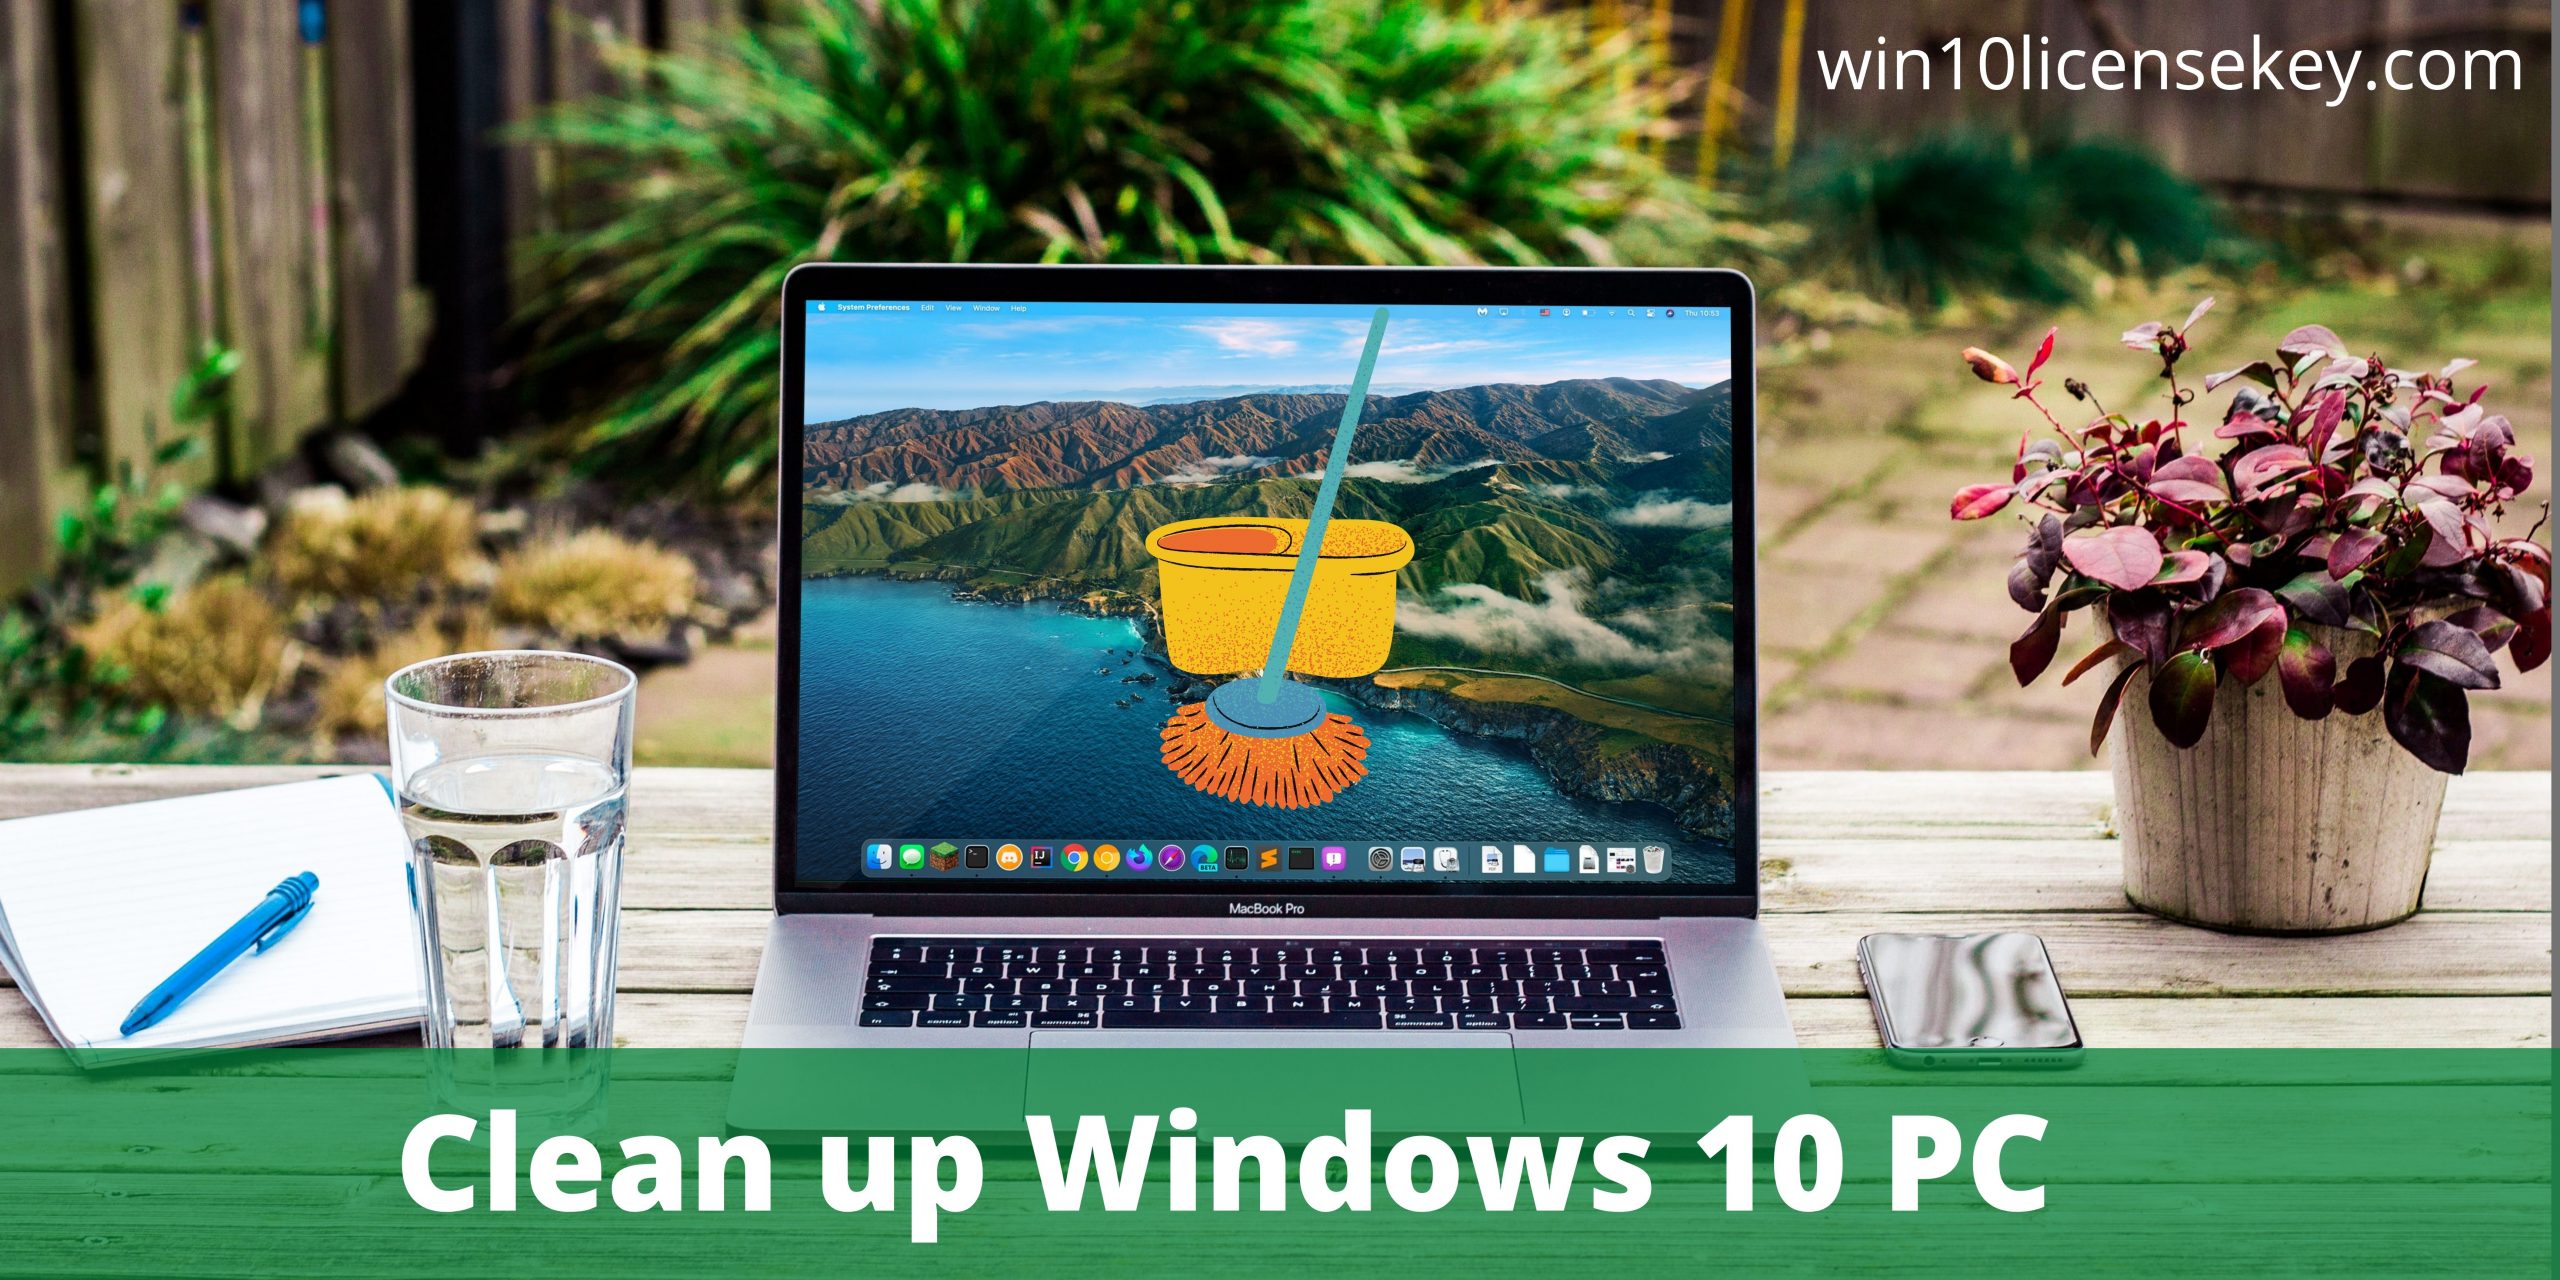 How to clean up windows 10 PC